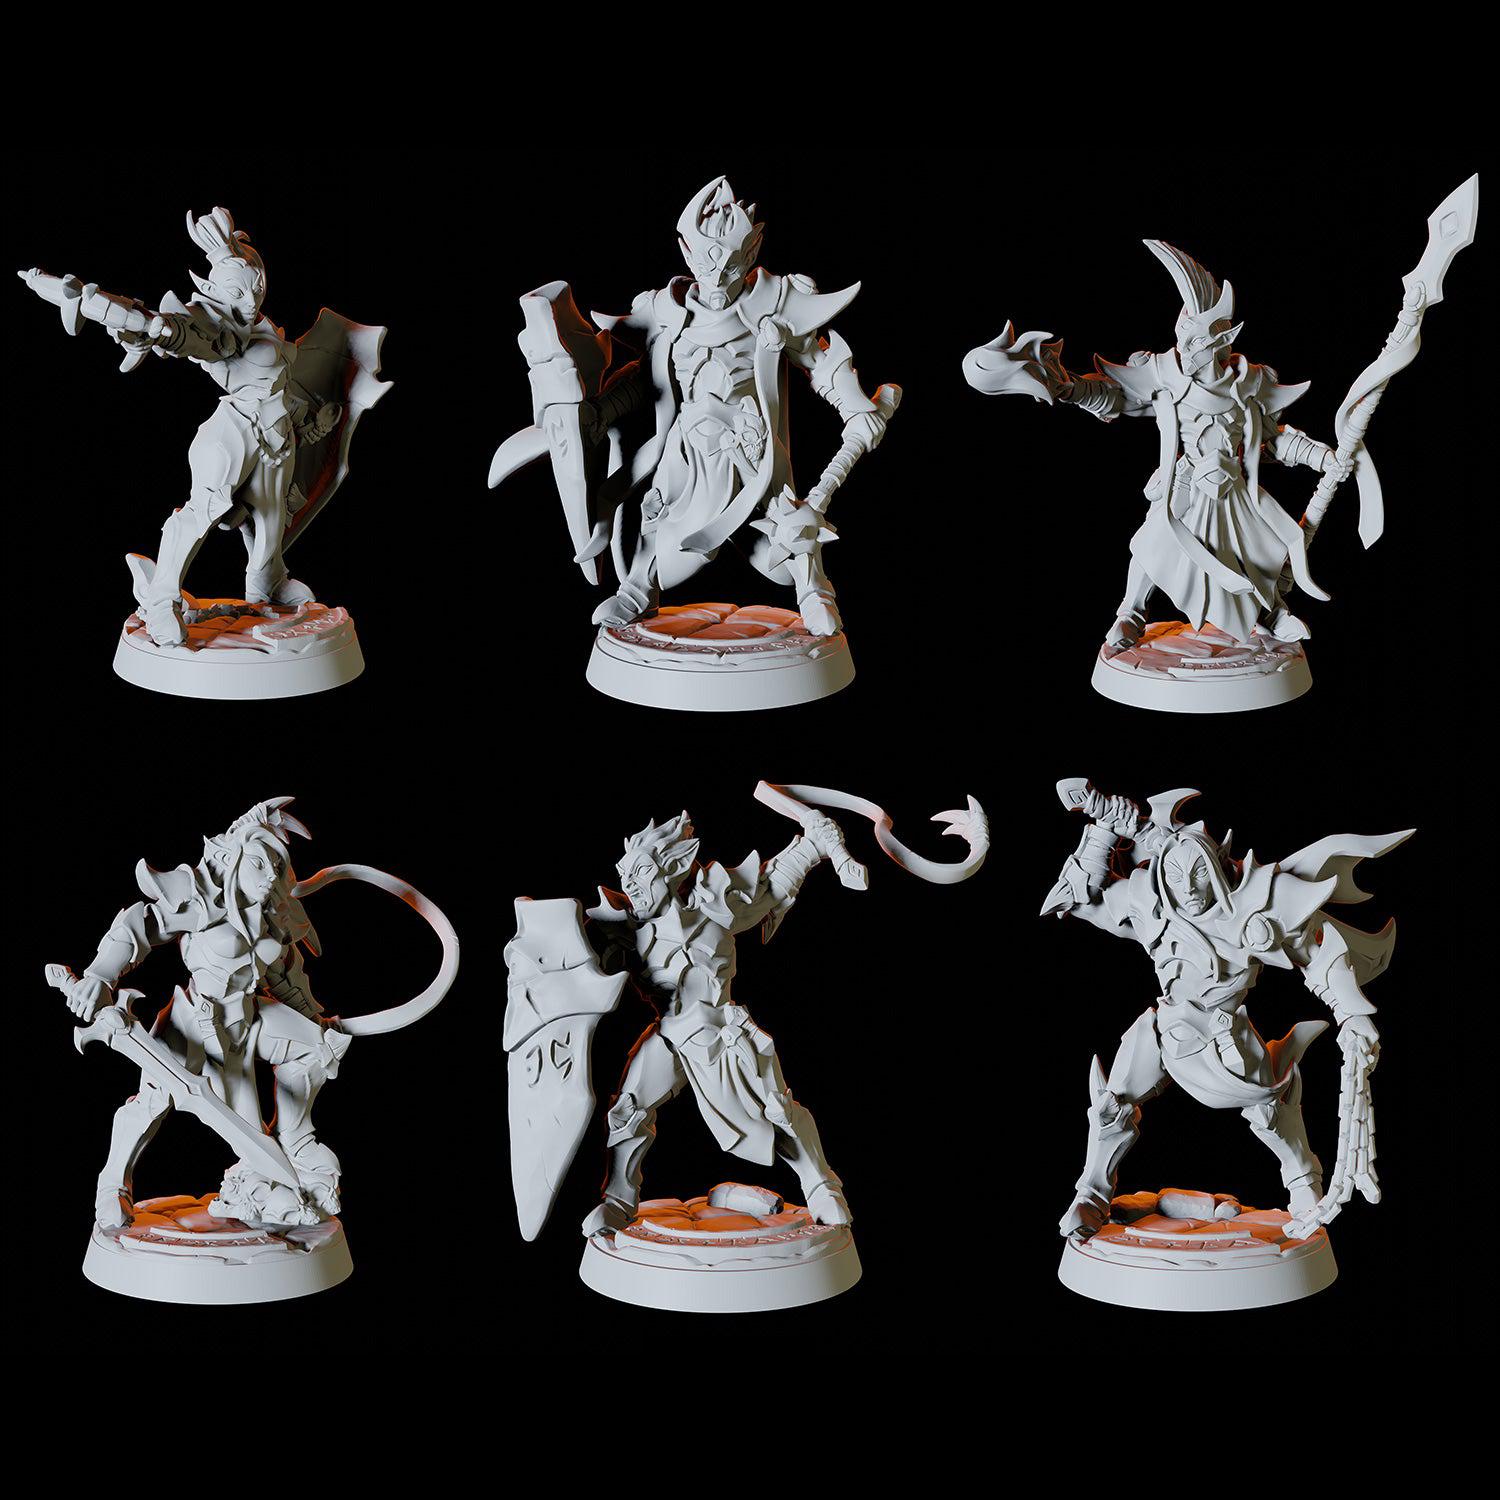 Drow or Elf Army - Six Soldier Miniatures for Dungeons and Dragons - Myth Forged